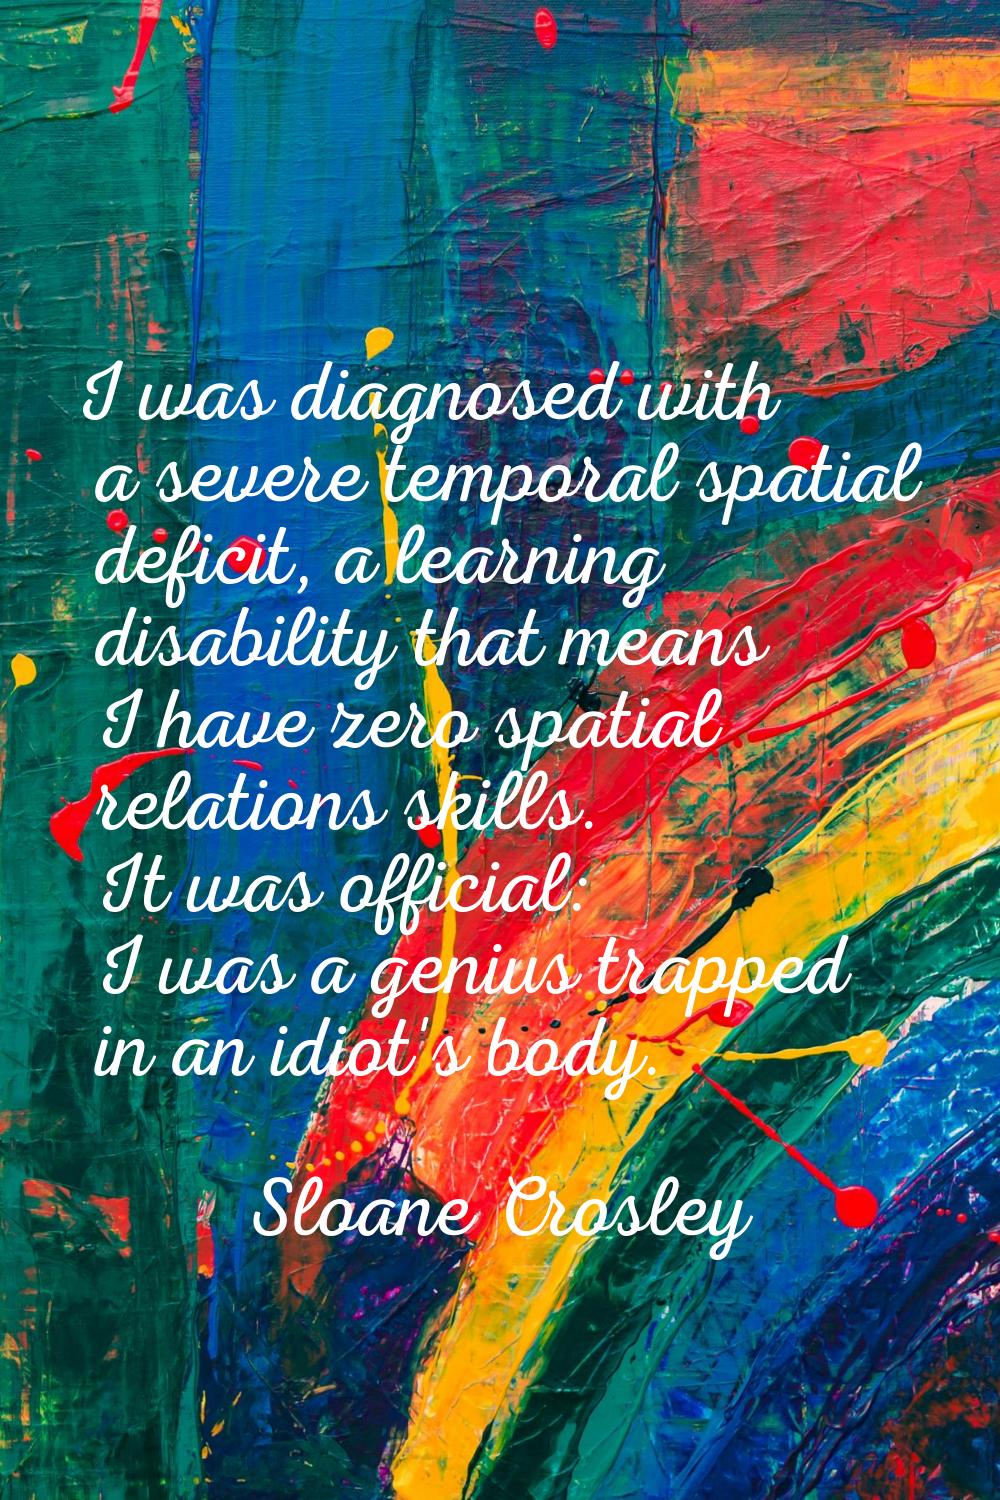 I was diagnosed with a severe temporal spatial deficit, a learning disability that means I have zer